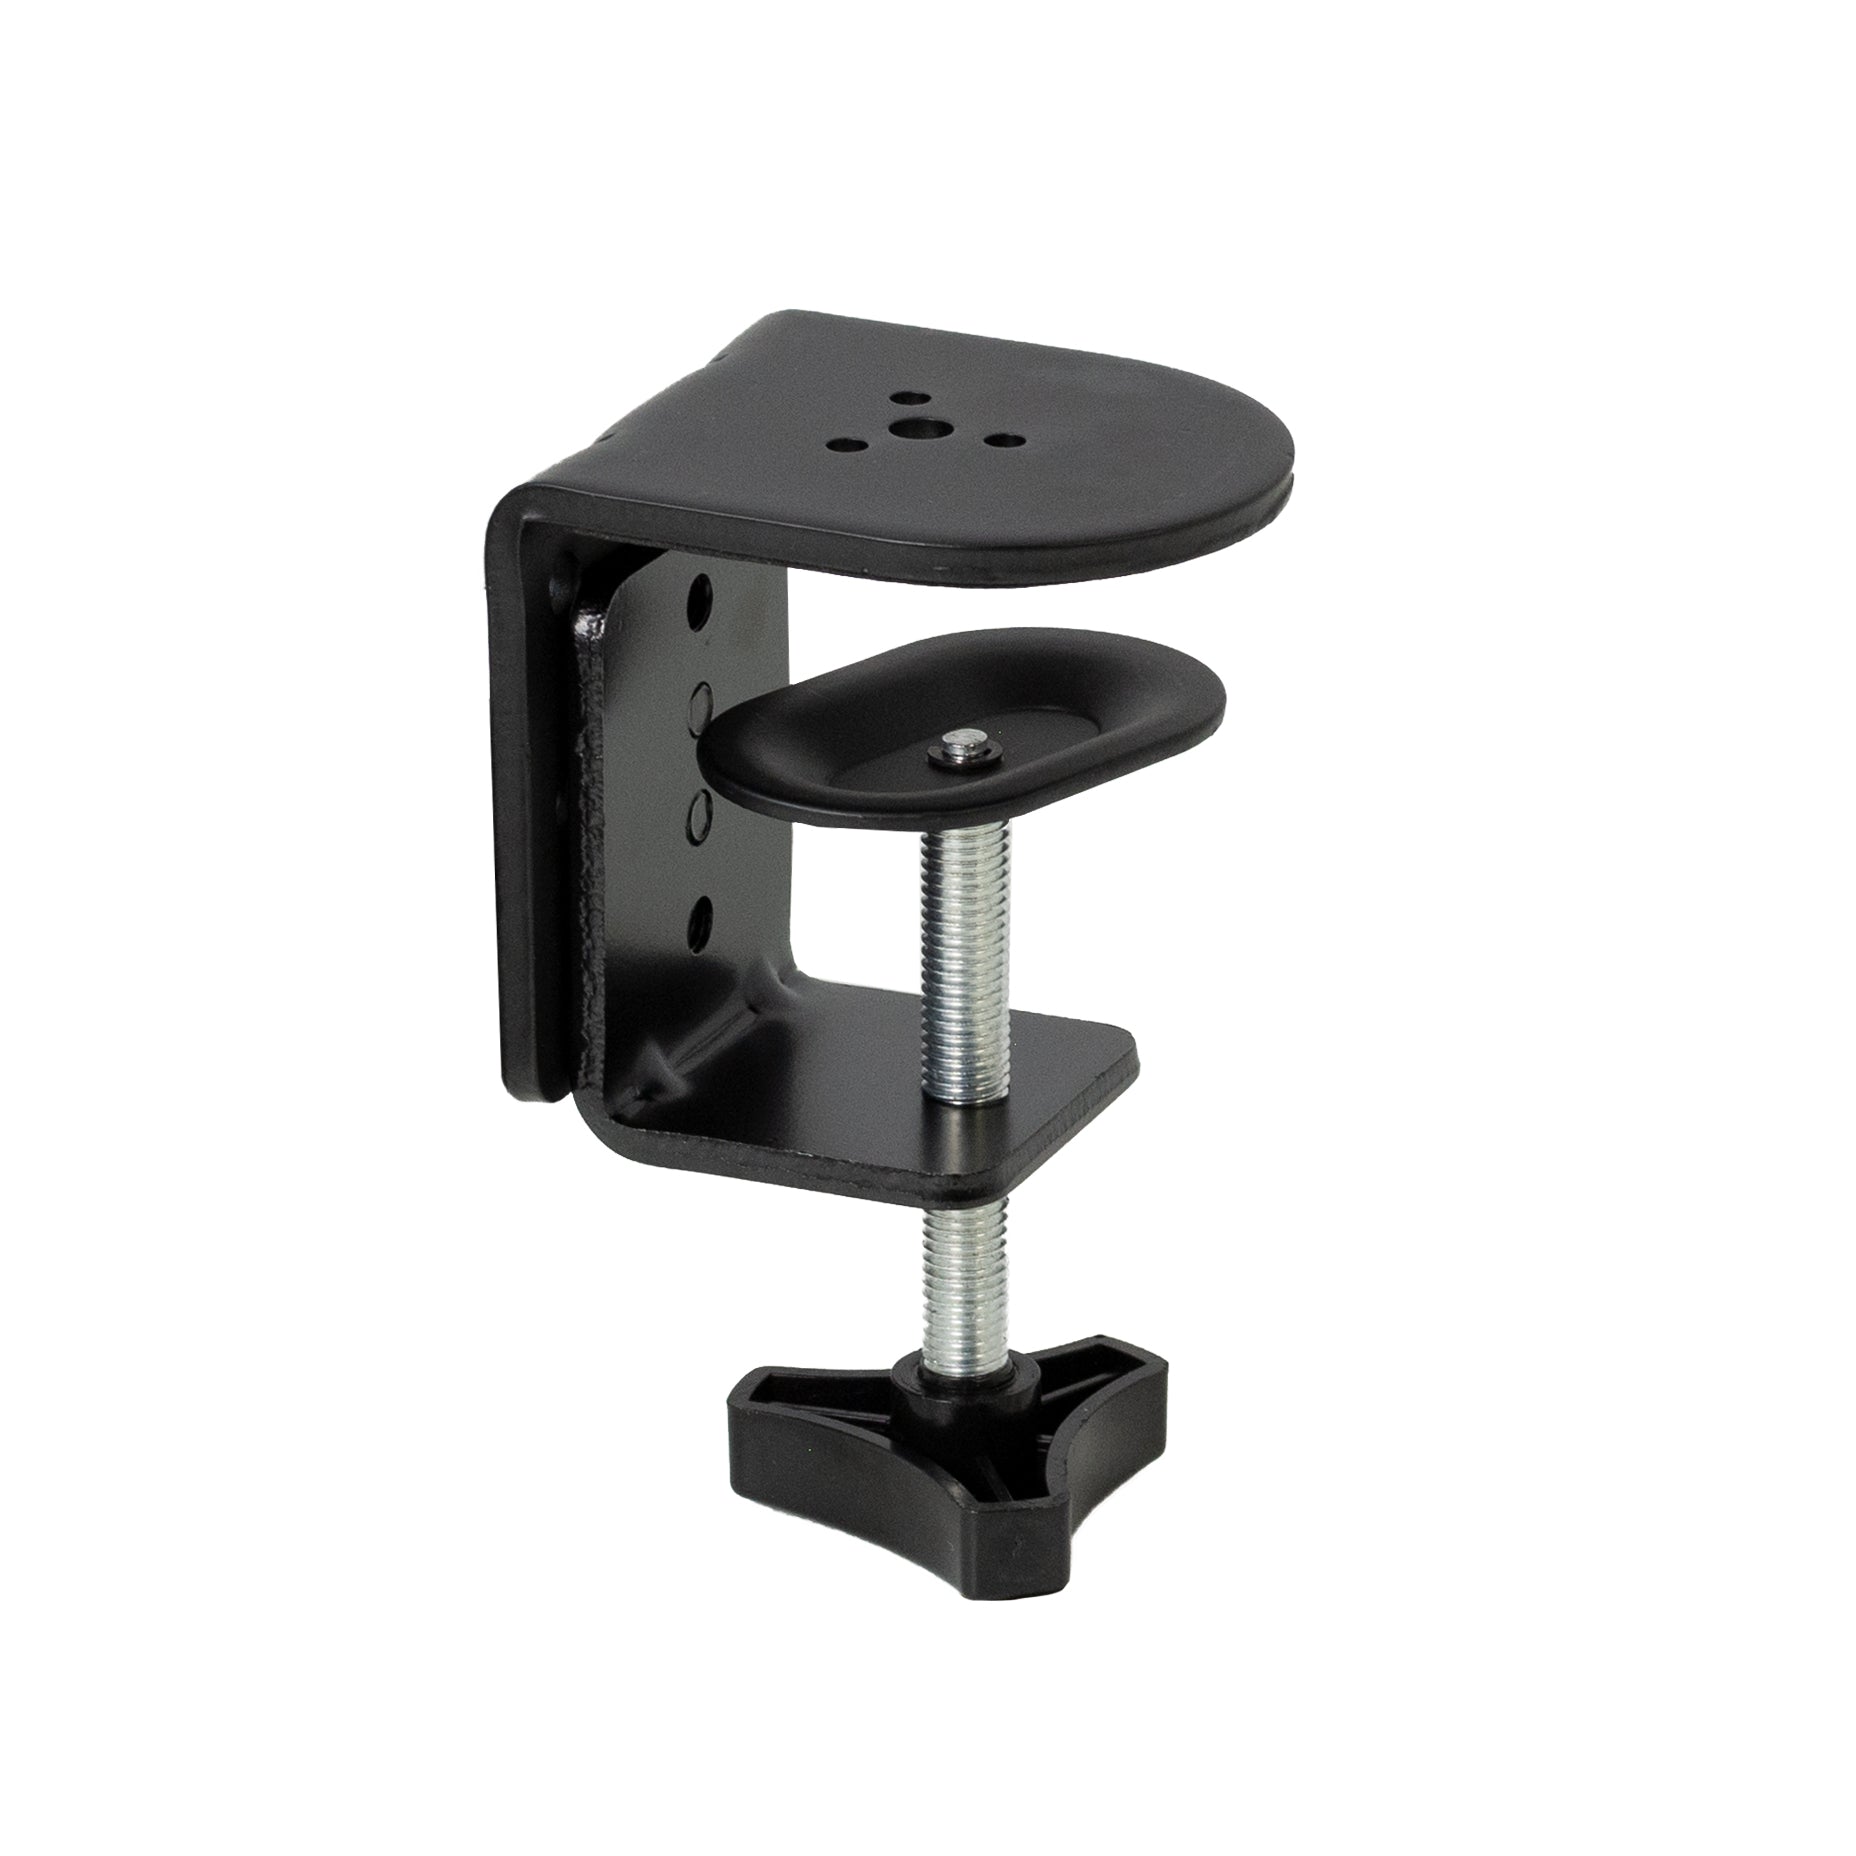 4 Desk C-Clamp for Monitor Mount – VIVO - desk solutions, screen mounting,  and more